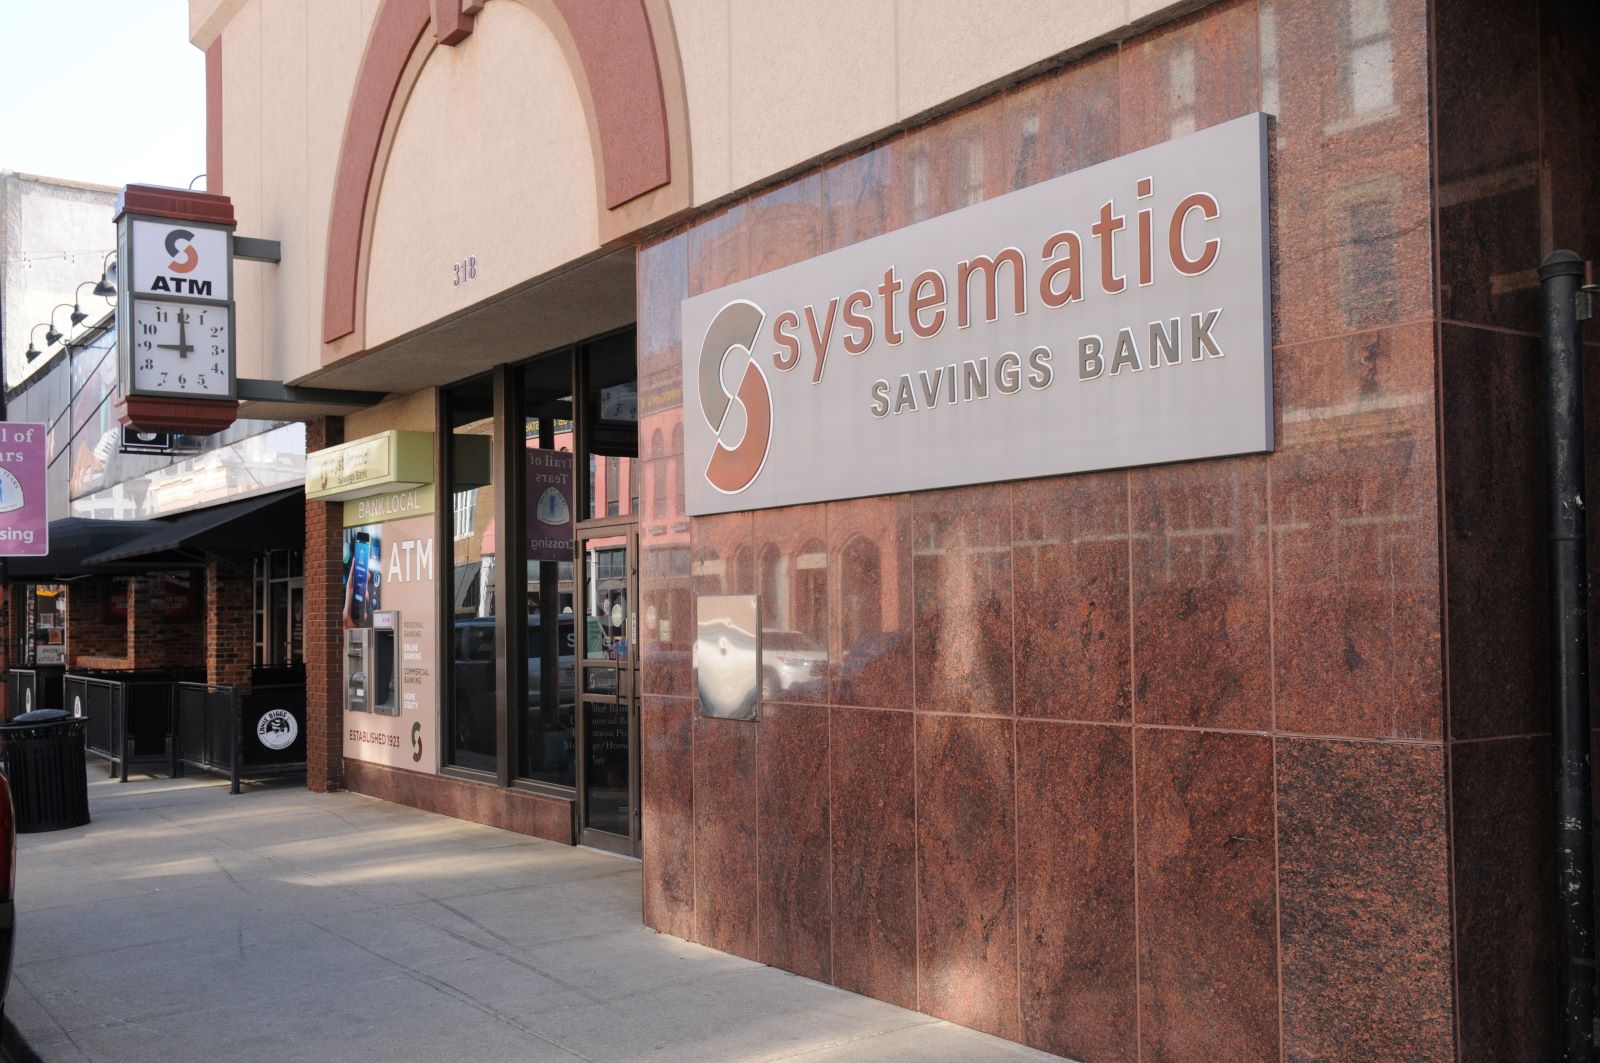 Systematic Savings Bank, downtown Springfield, Missouri location on South Avenue